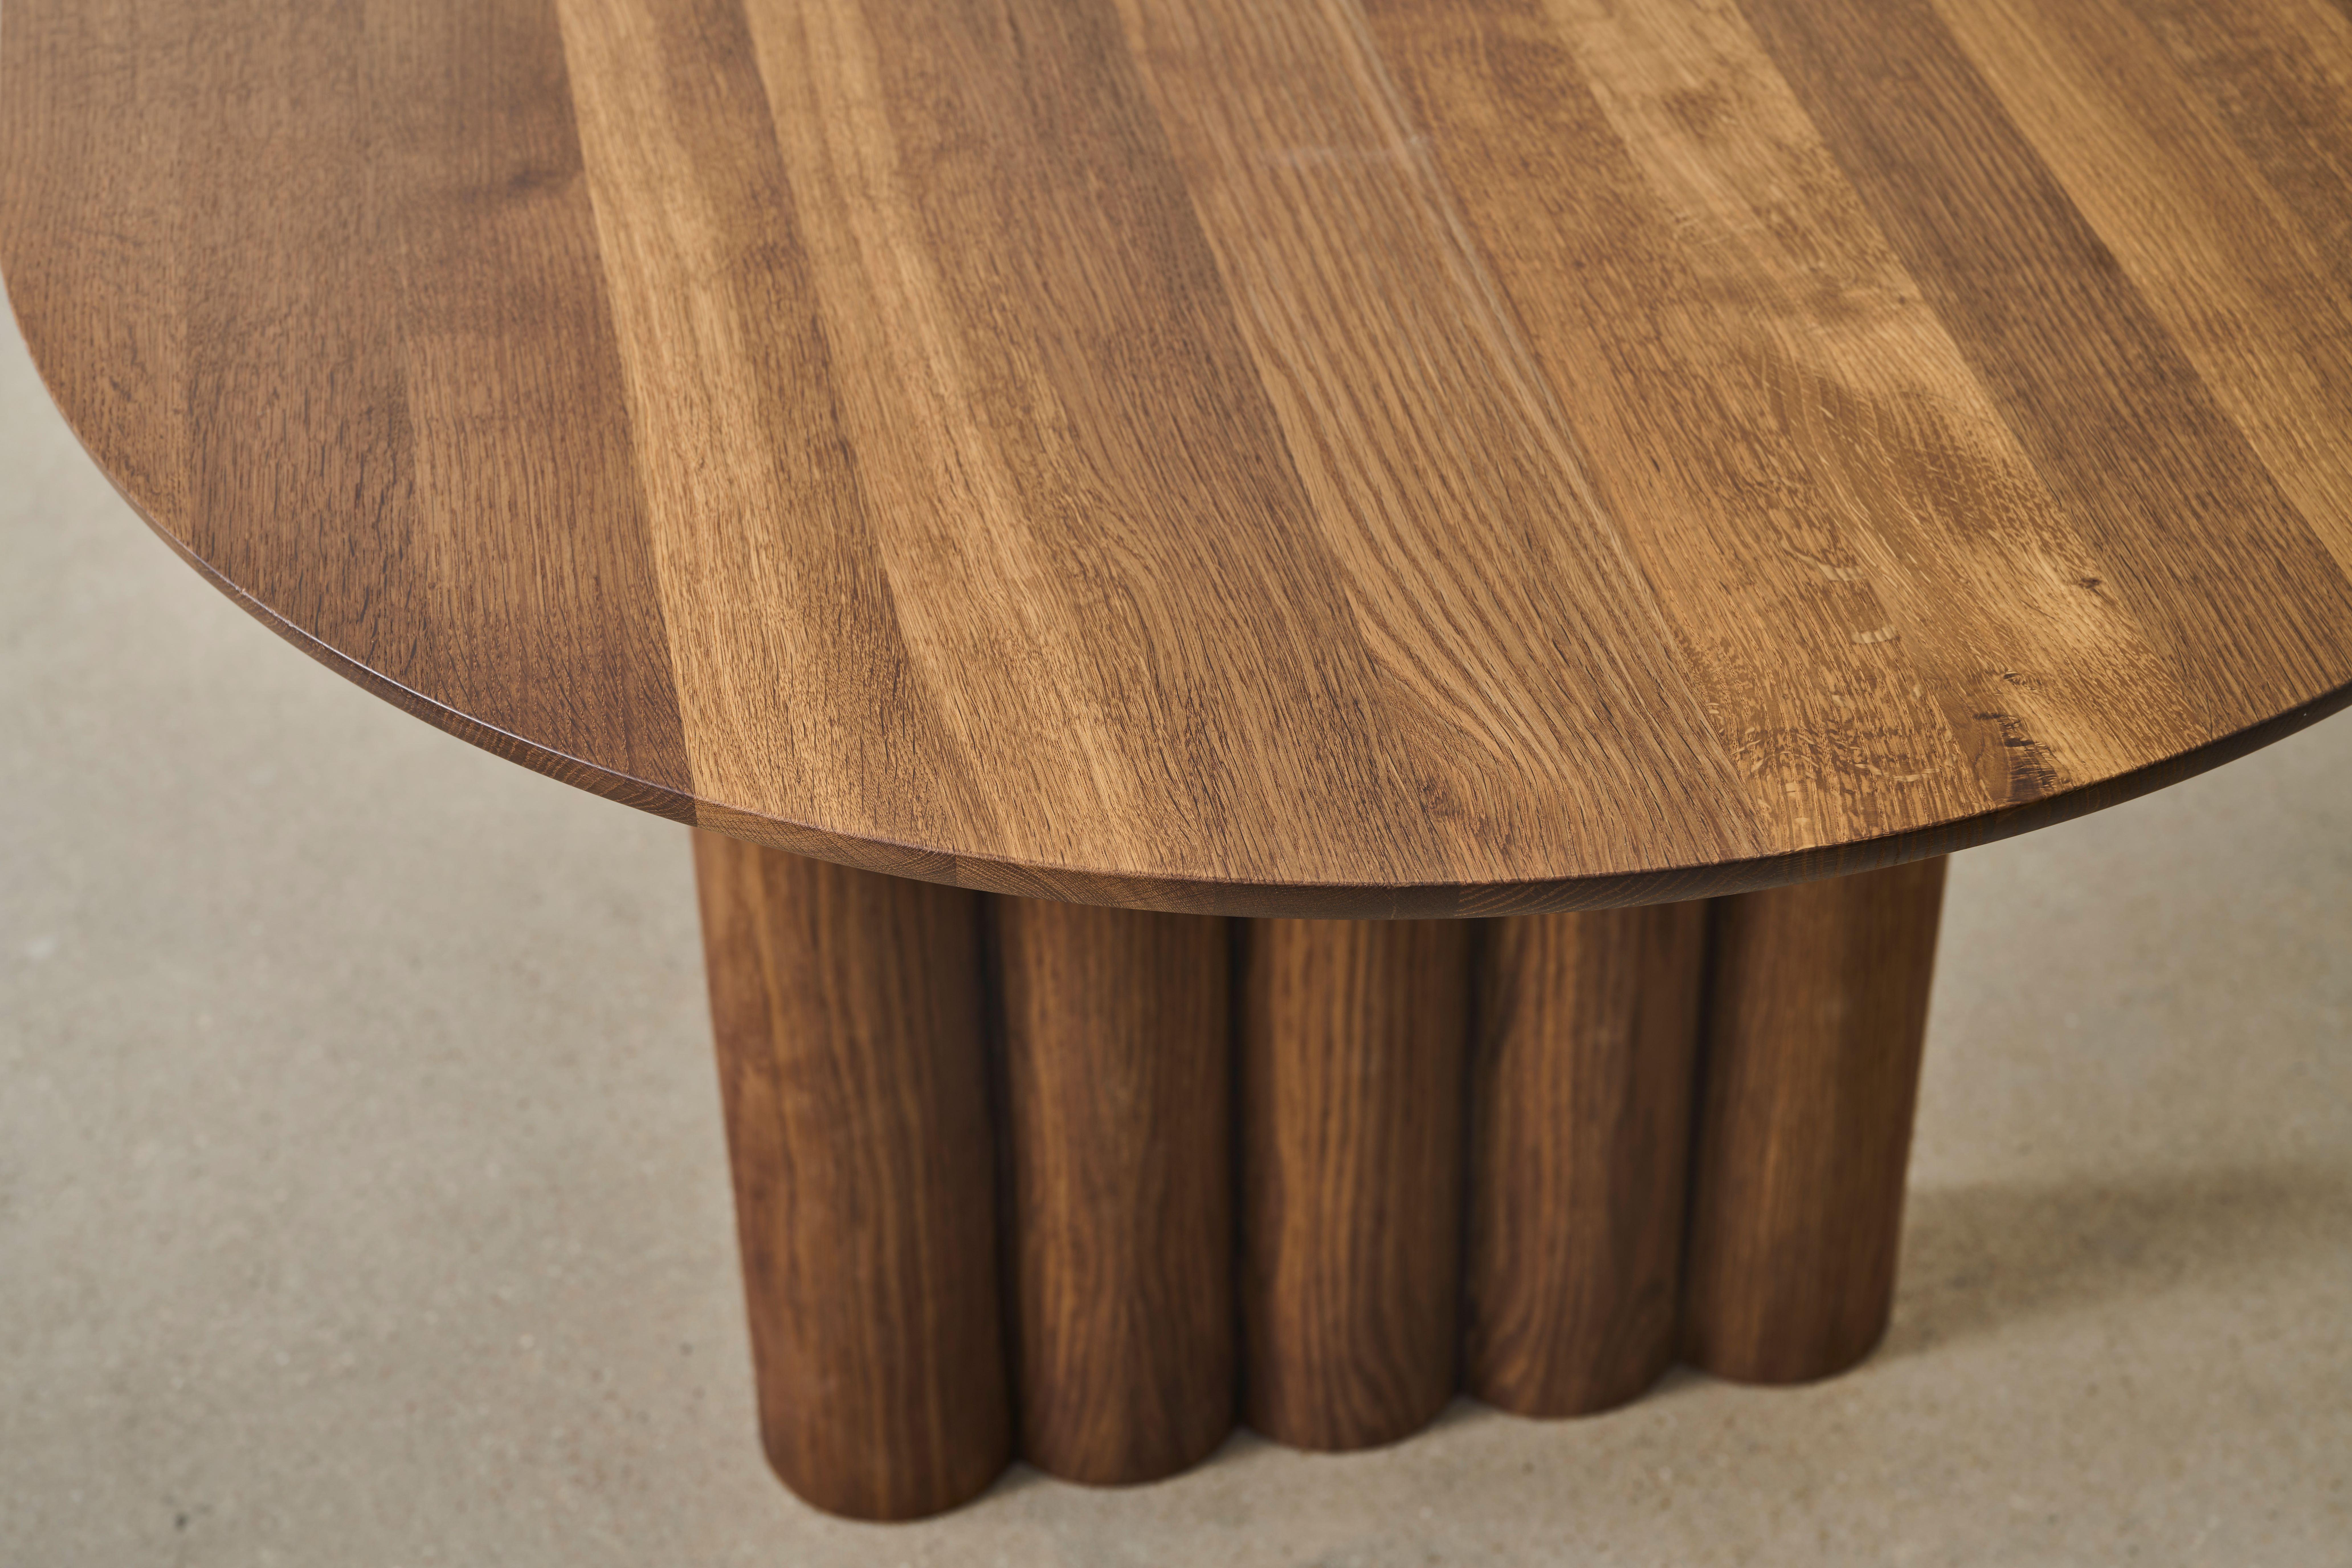 Contemporary Dining Table 'Plush' by Dk3, Smoked Oak or Walnut, 270, Rectangular In New Condition For Sale In Paris, FR